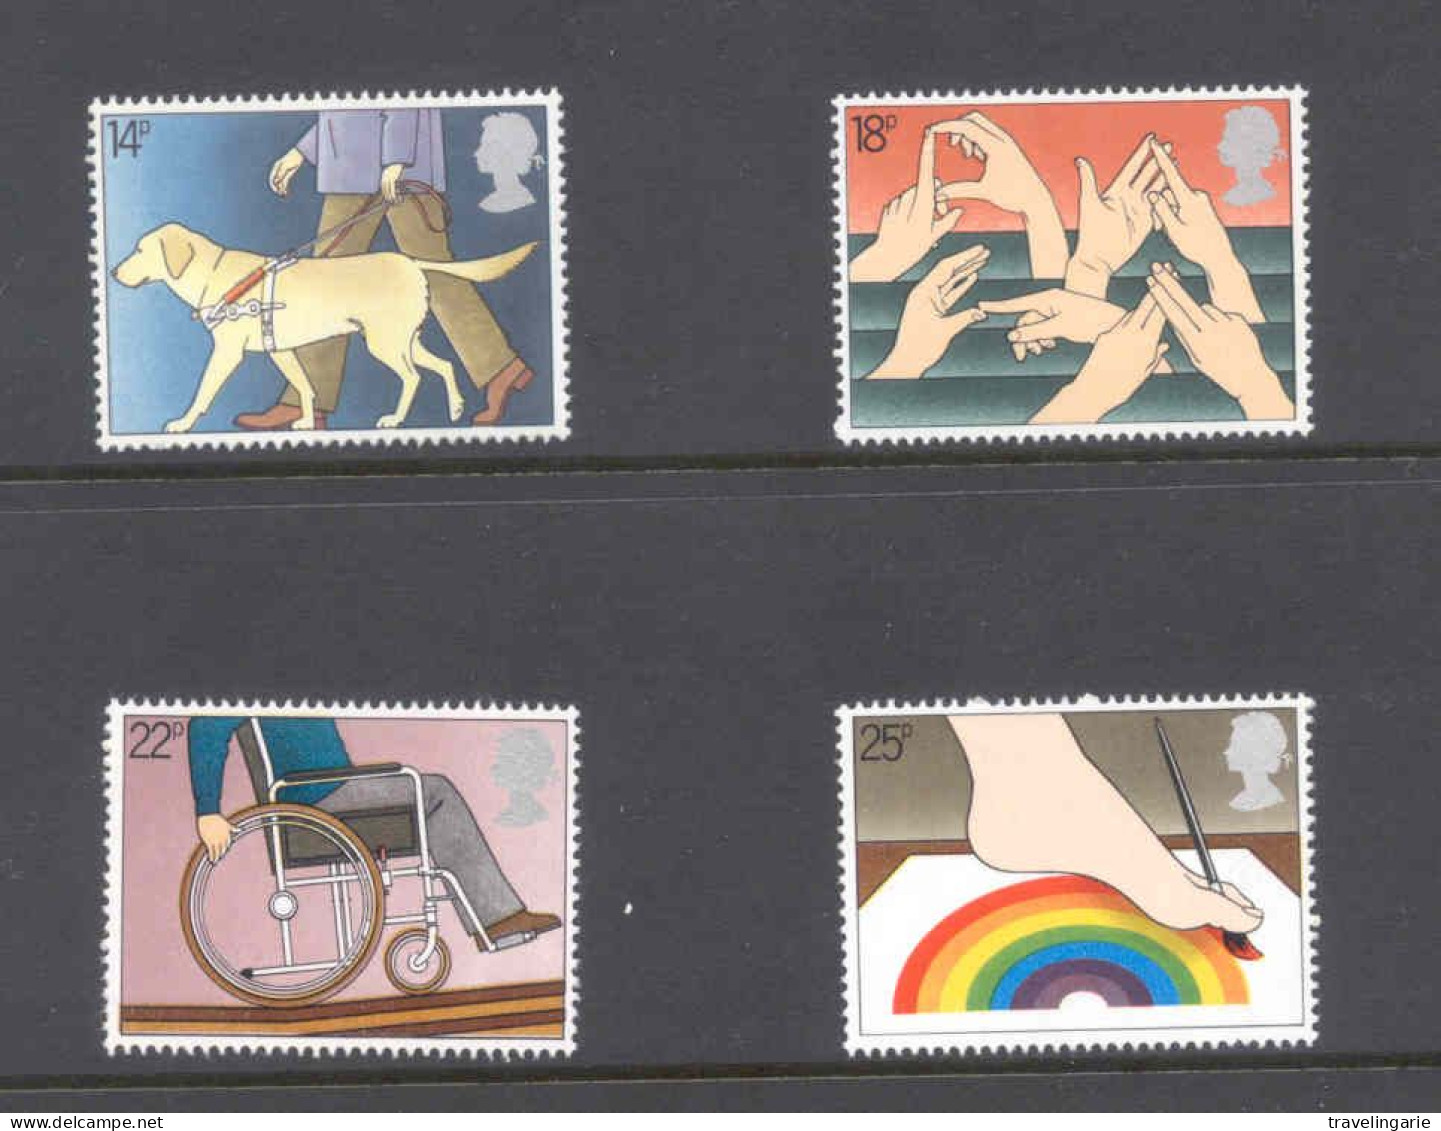 Great-Britain 1981 International Year Of The Disabled With Guide Dog MNH ** - Perros